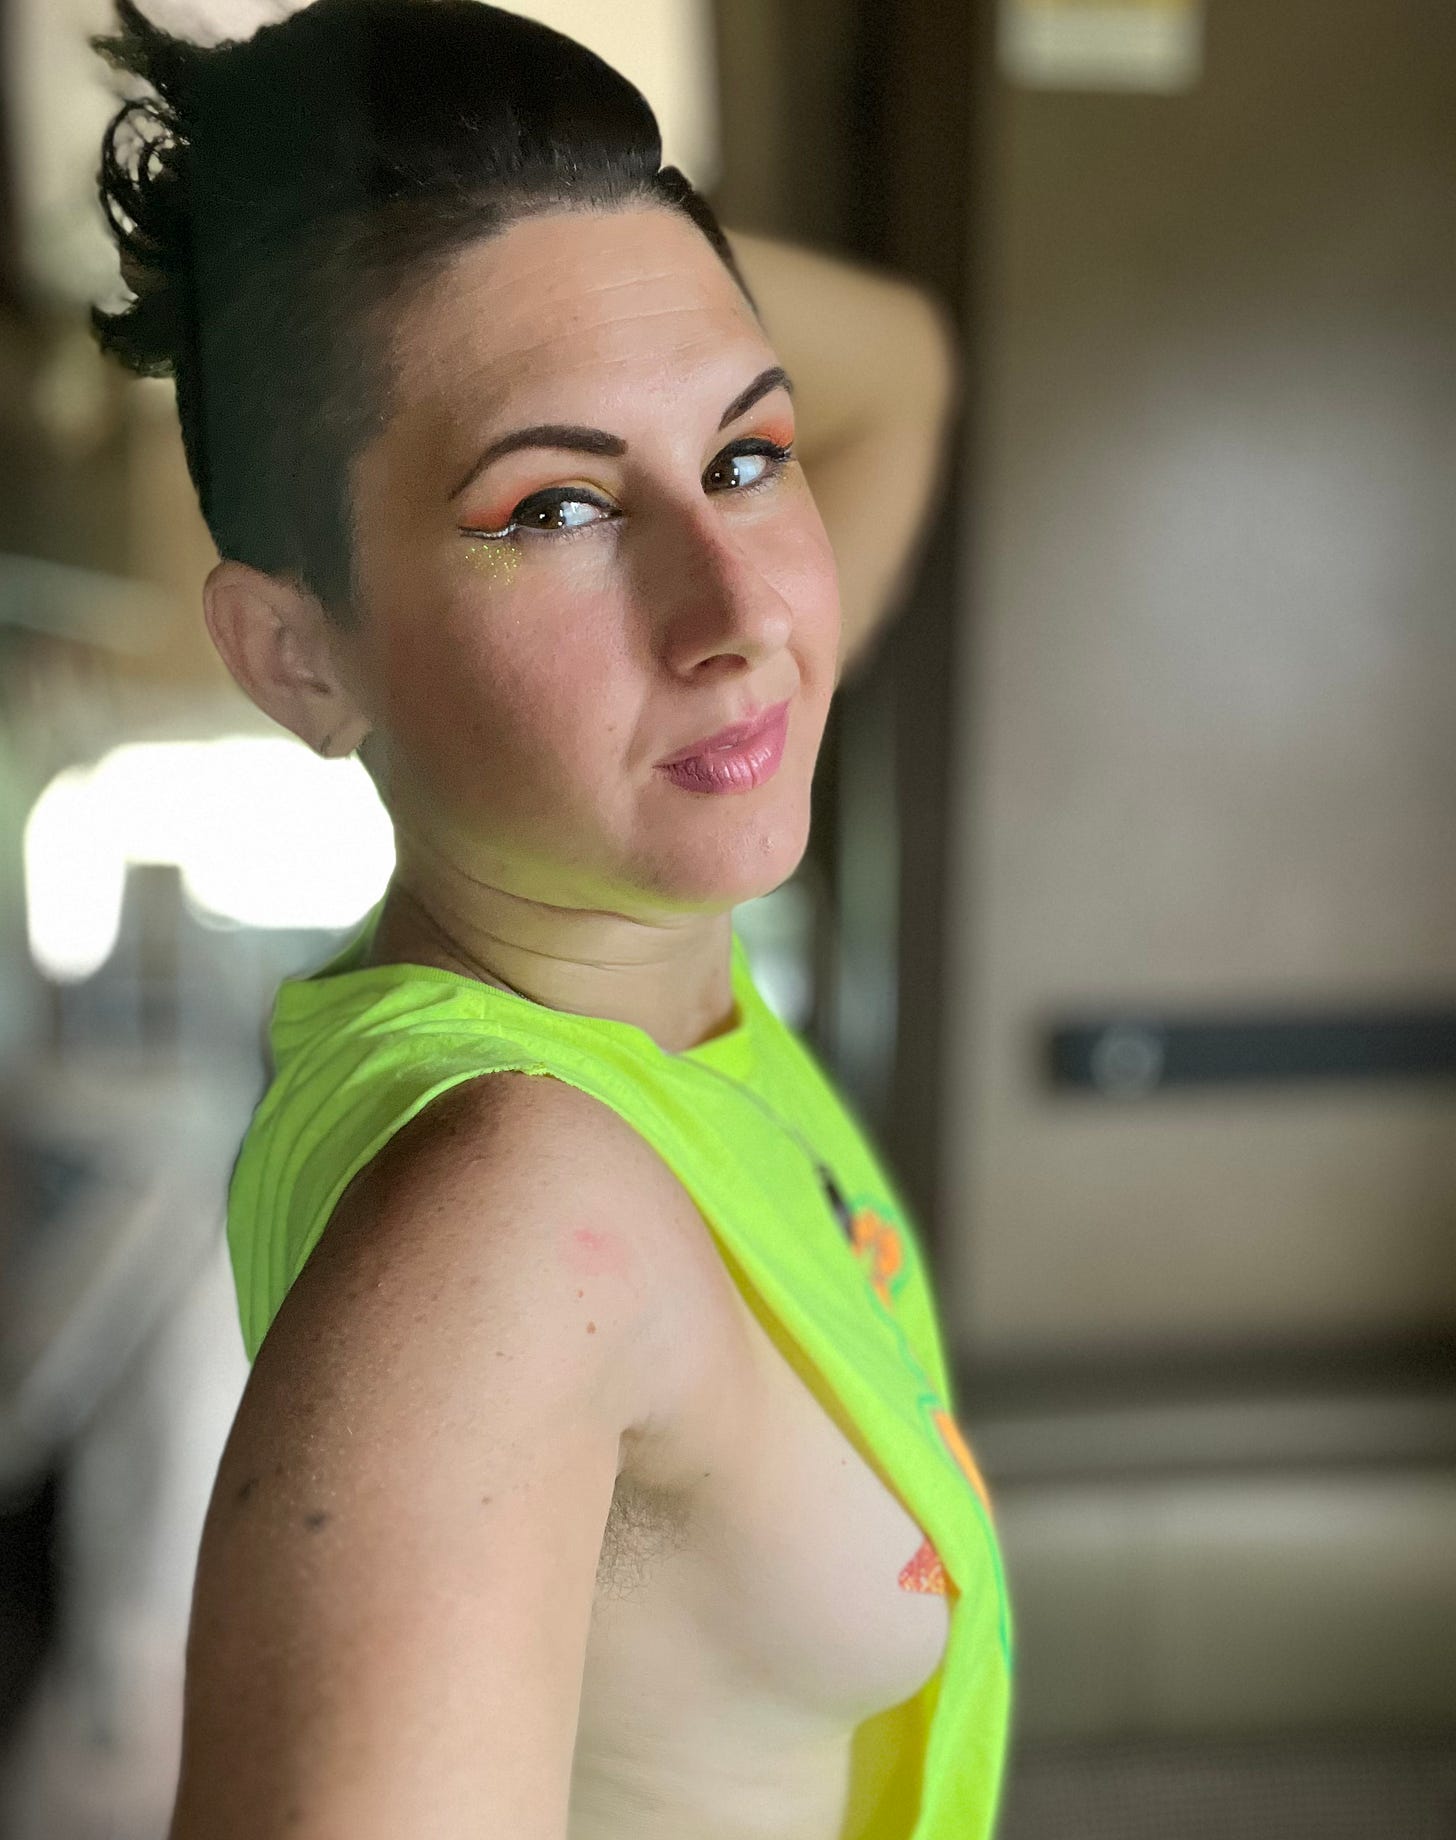 Lyric Rivera, in a neon yellow shirt that shows a lot of their bare side, but a pastie is covering the “vital parts” - they have gold and orange winged eyeliner, pink lipstick, and are posing for a selfie inside their RV. 